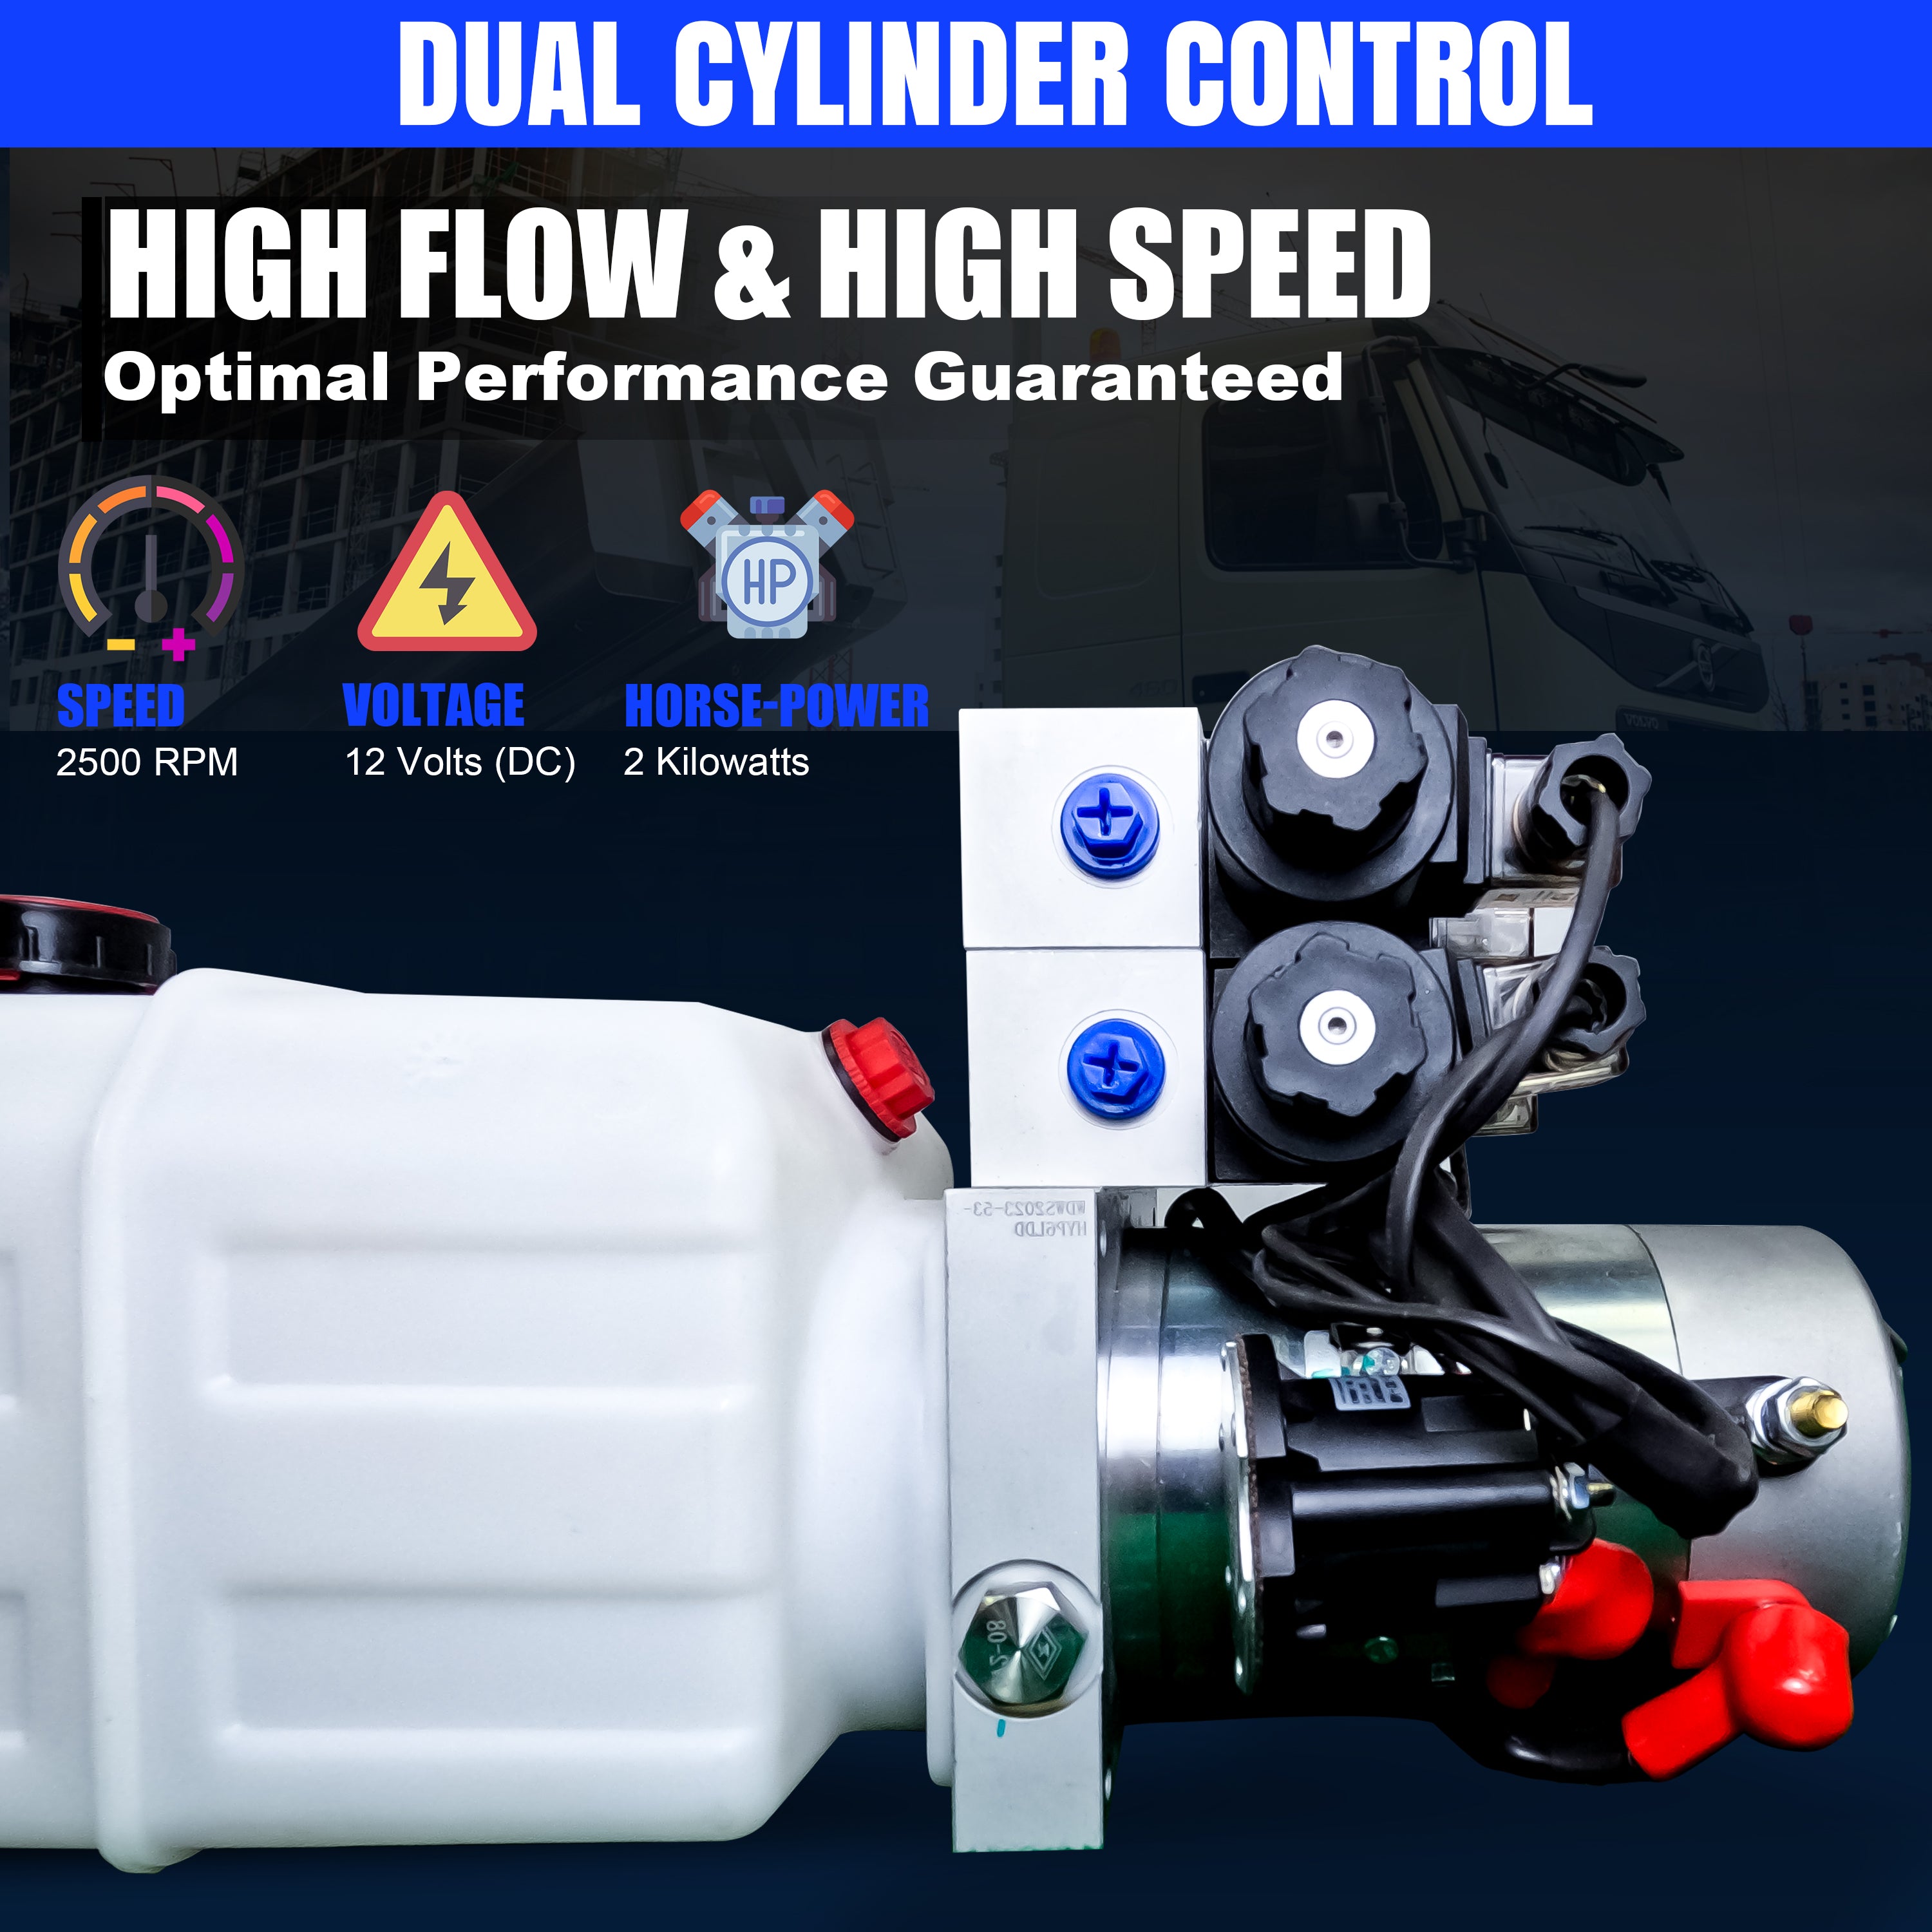 Compact and powerful Primary Mover 12V Dual Double-Acting Hydraulic Power Unit for dump trailers and trucks. Quad power capability for versatile hydraulic operations.